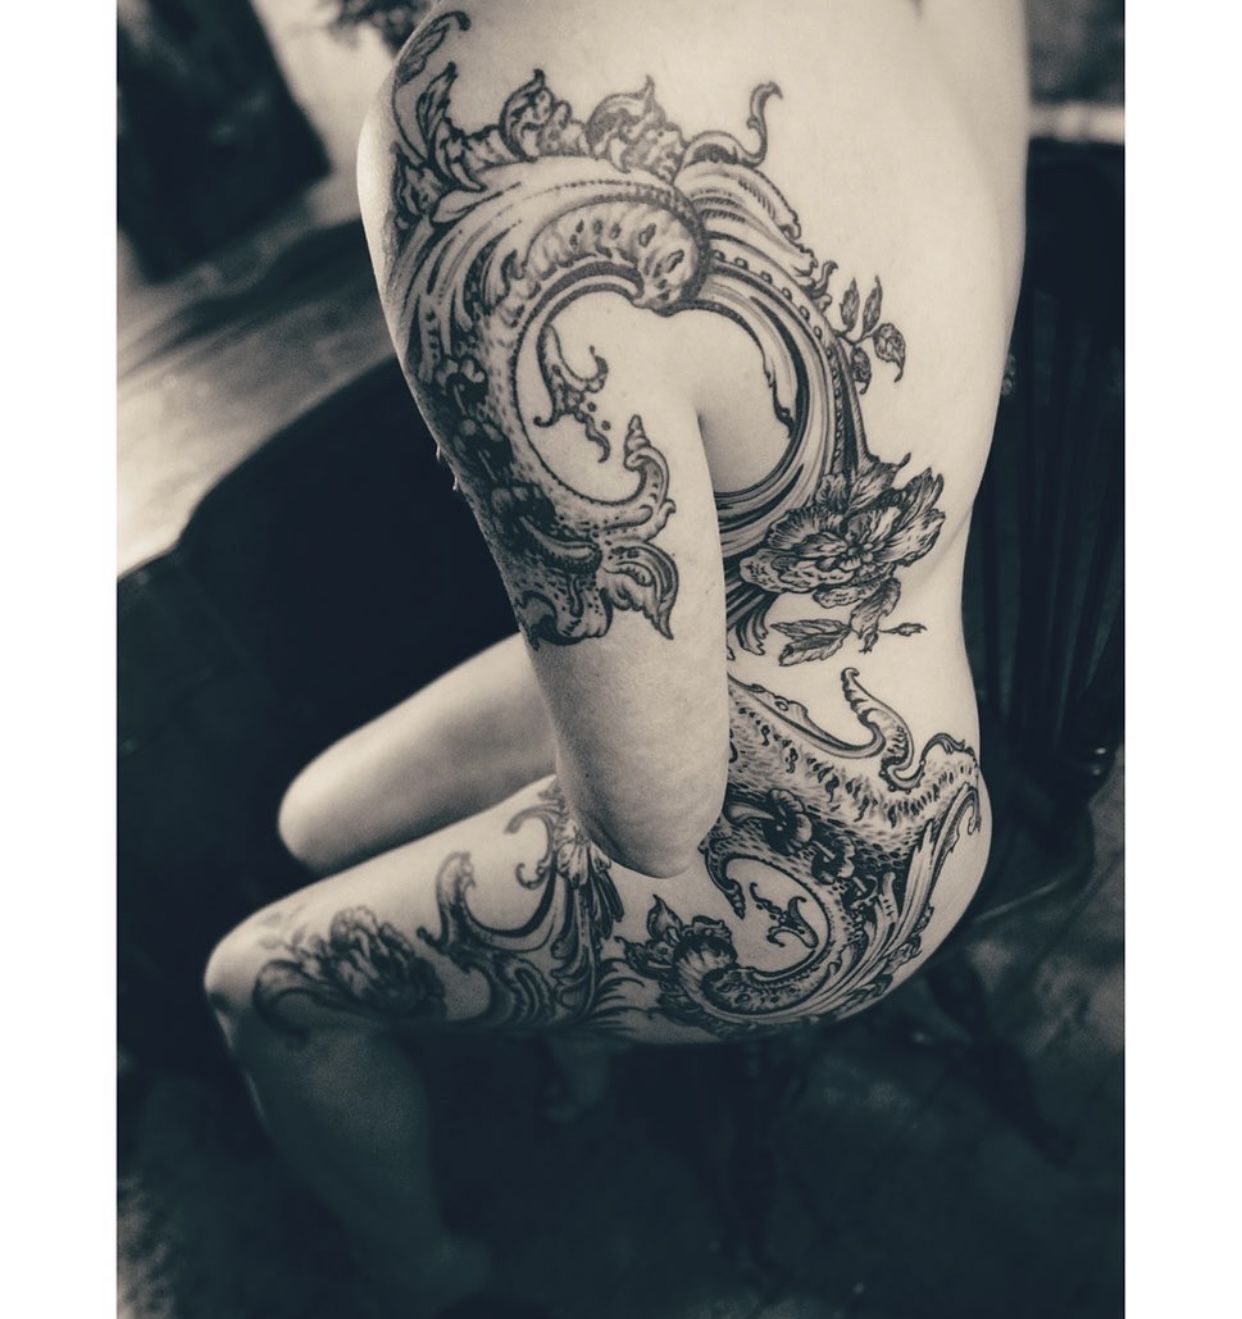 33 Scorpio Tattoo Ideas For Spectacular Women - Page 2 of 2